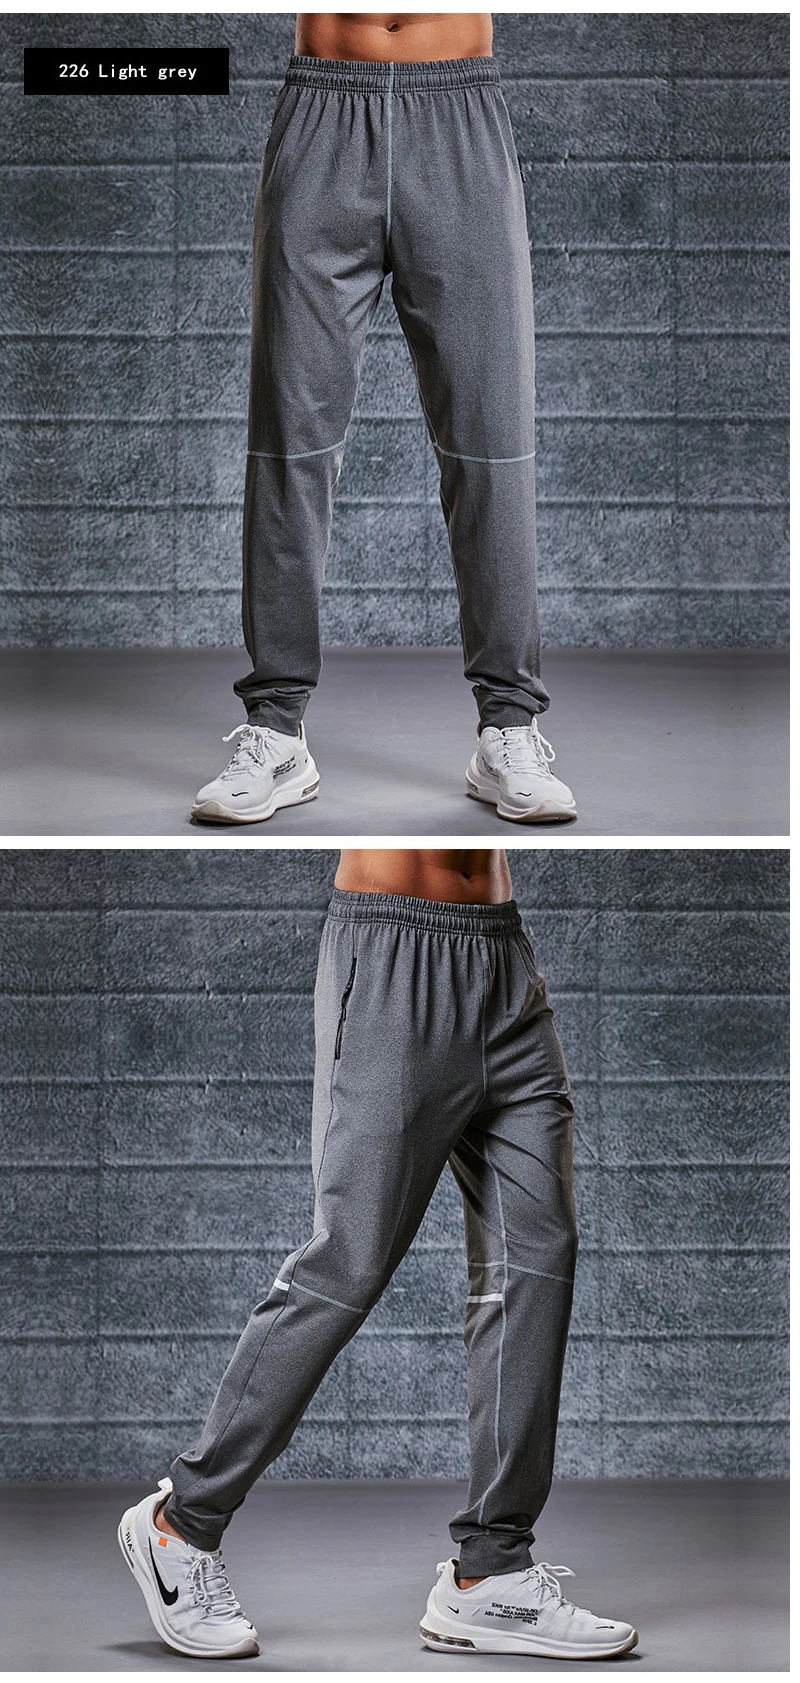 Sports pants men pants autumn winter loose quick drying pants Pocket zipper casual health pants thin running fitness trousers